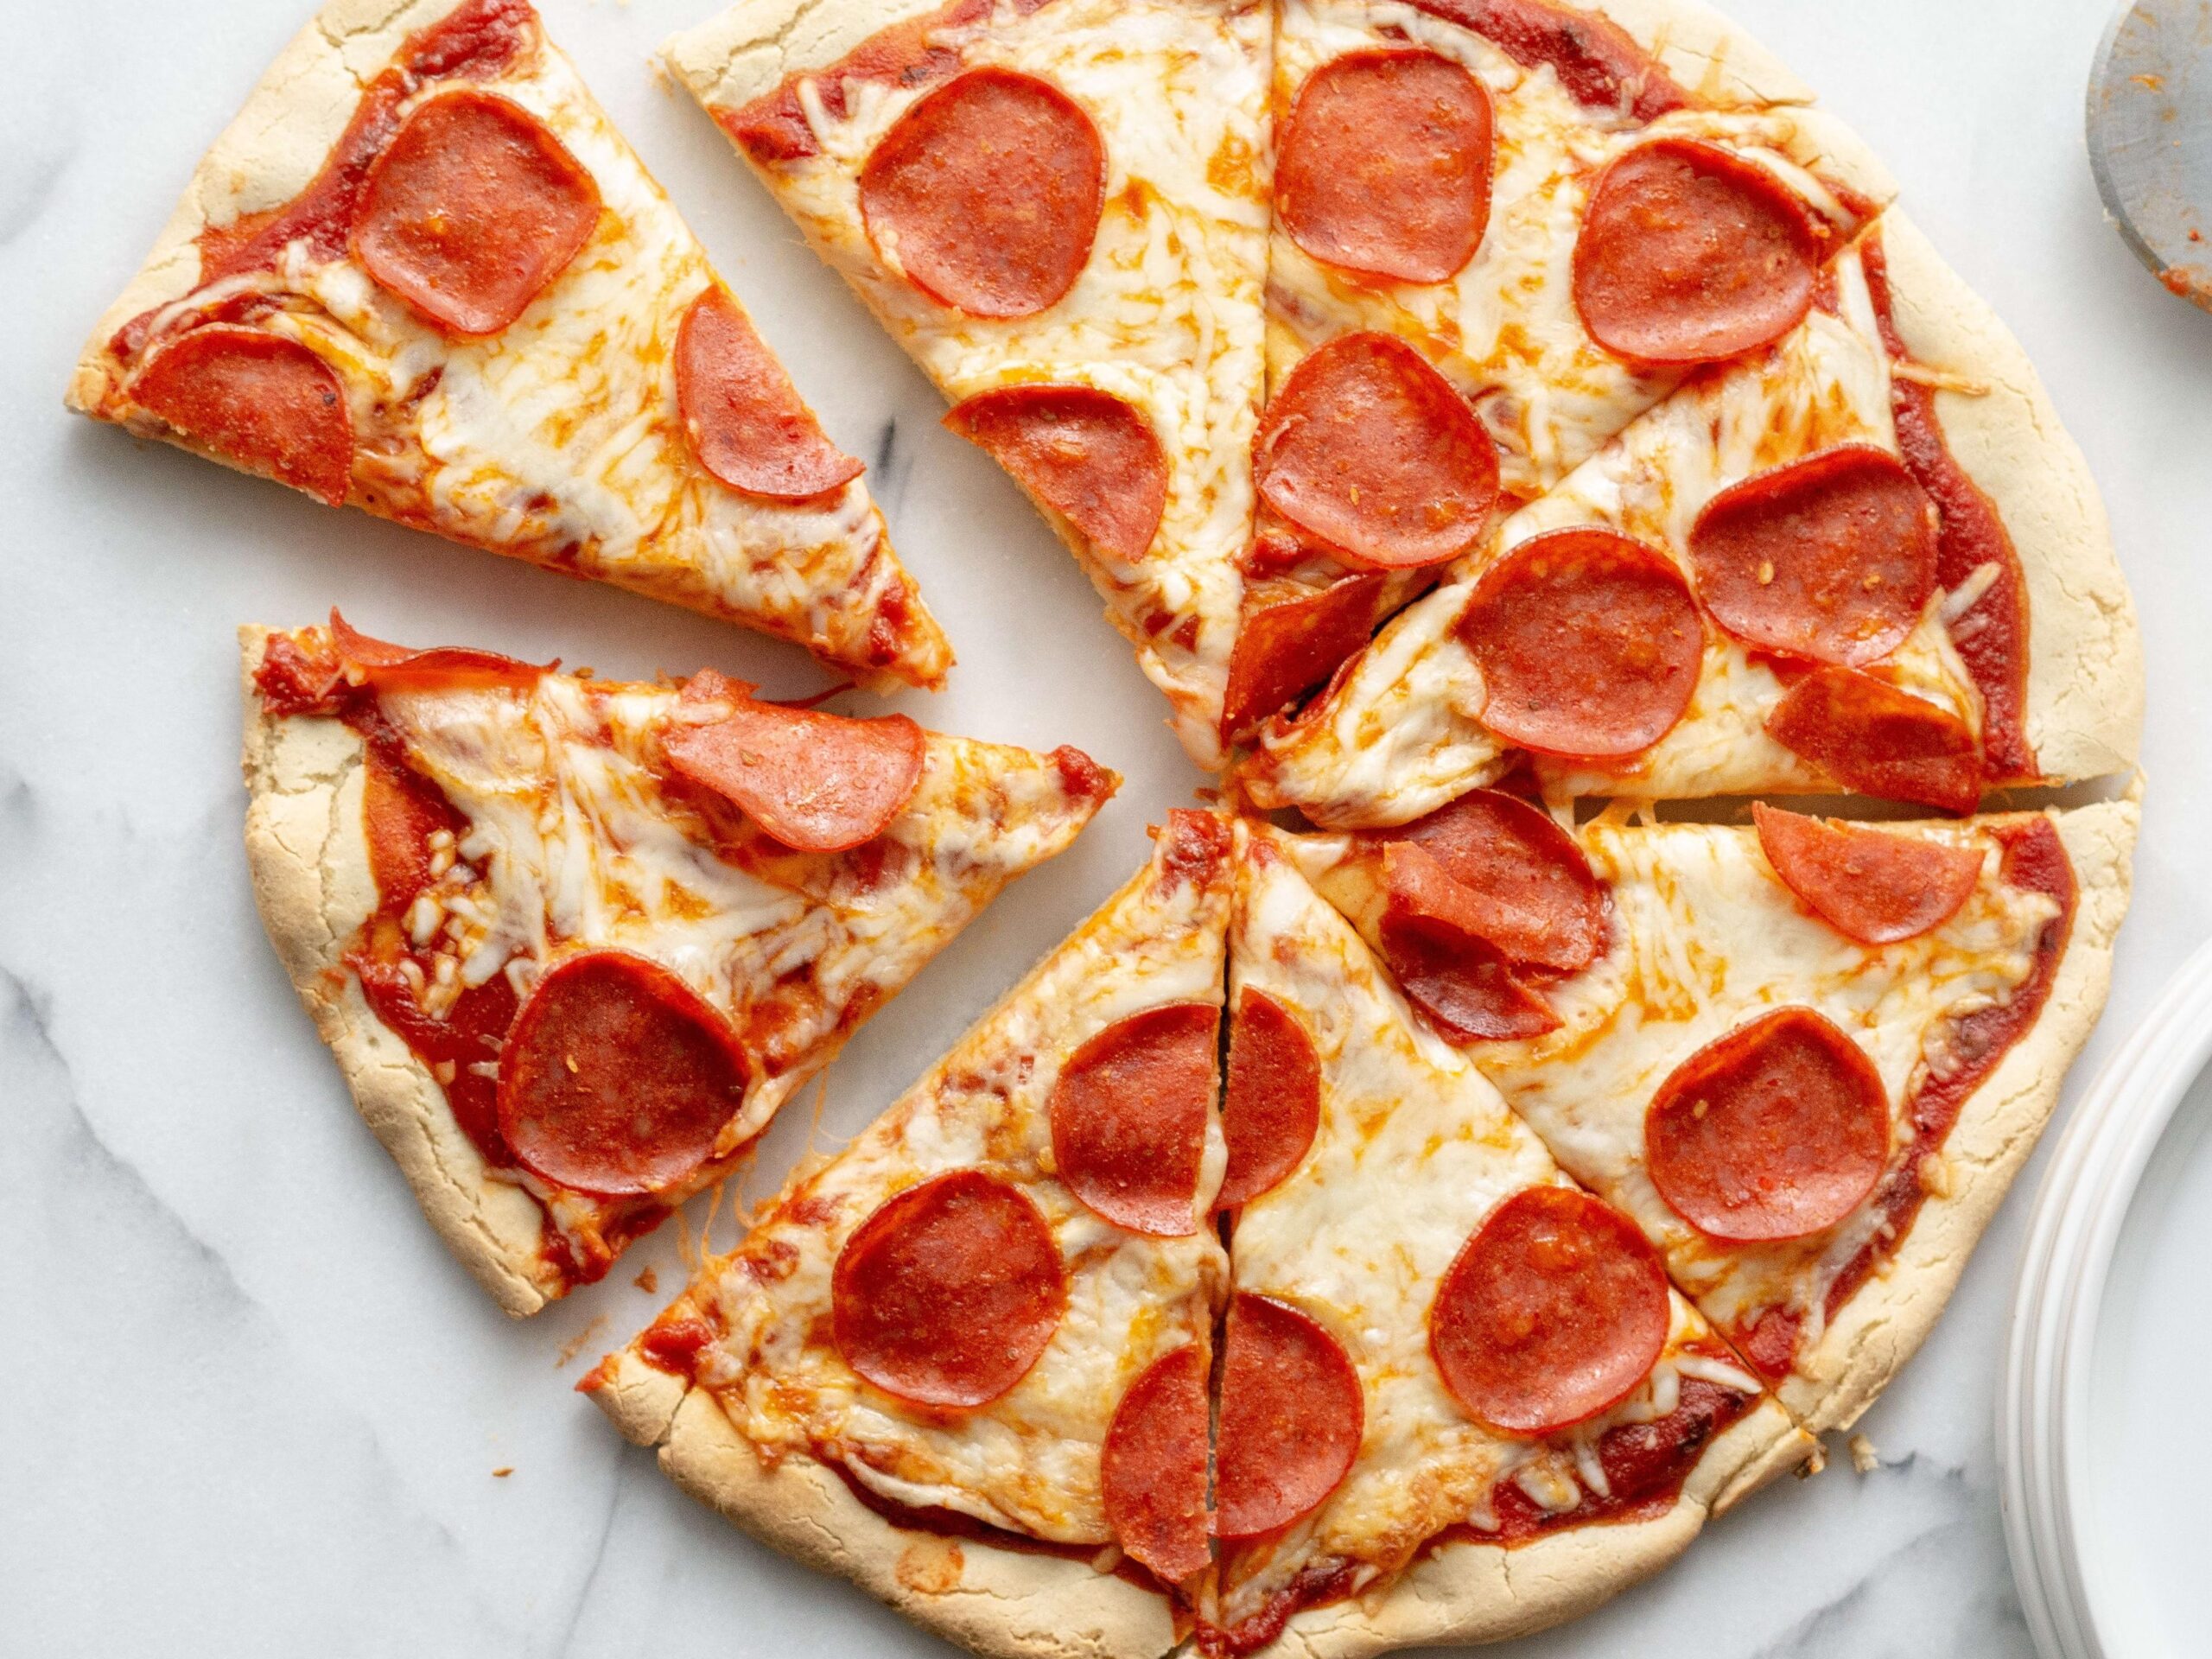  Get creative with your toppings and make this pizza your own.